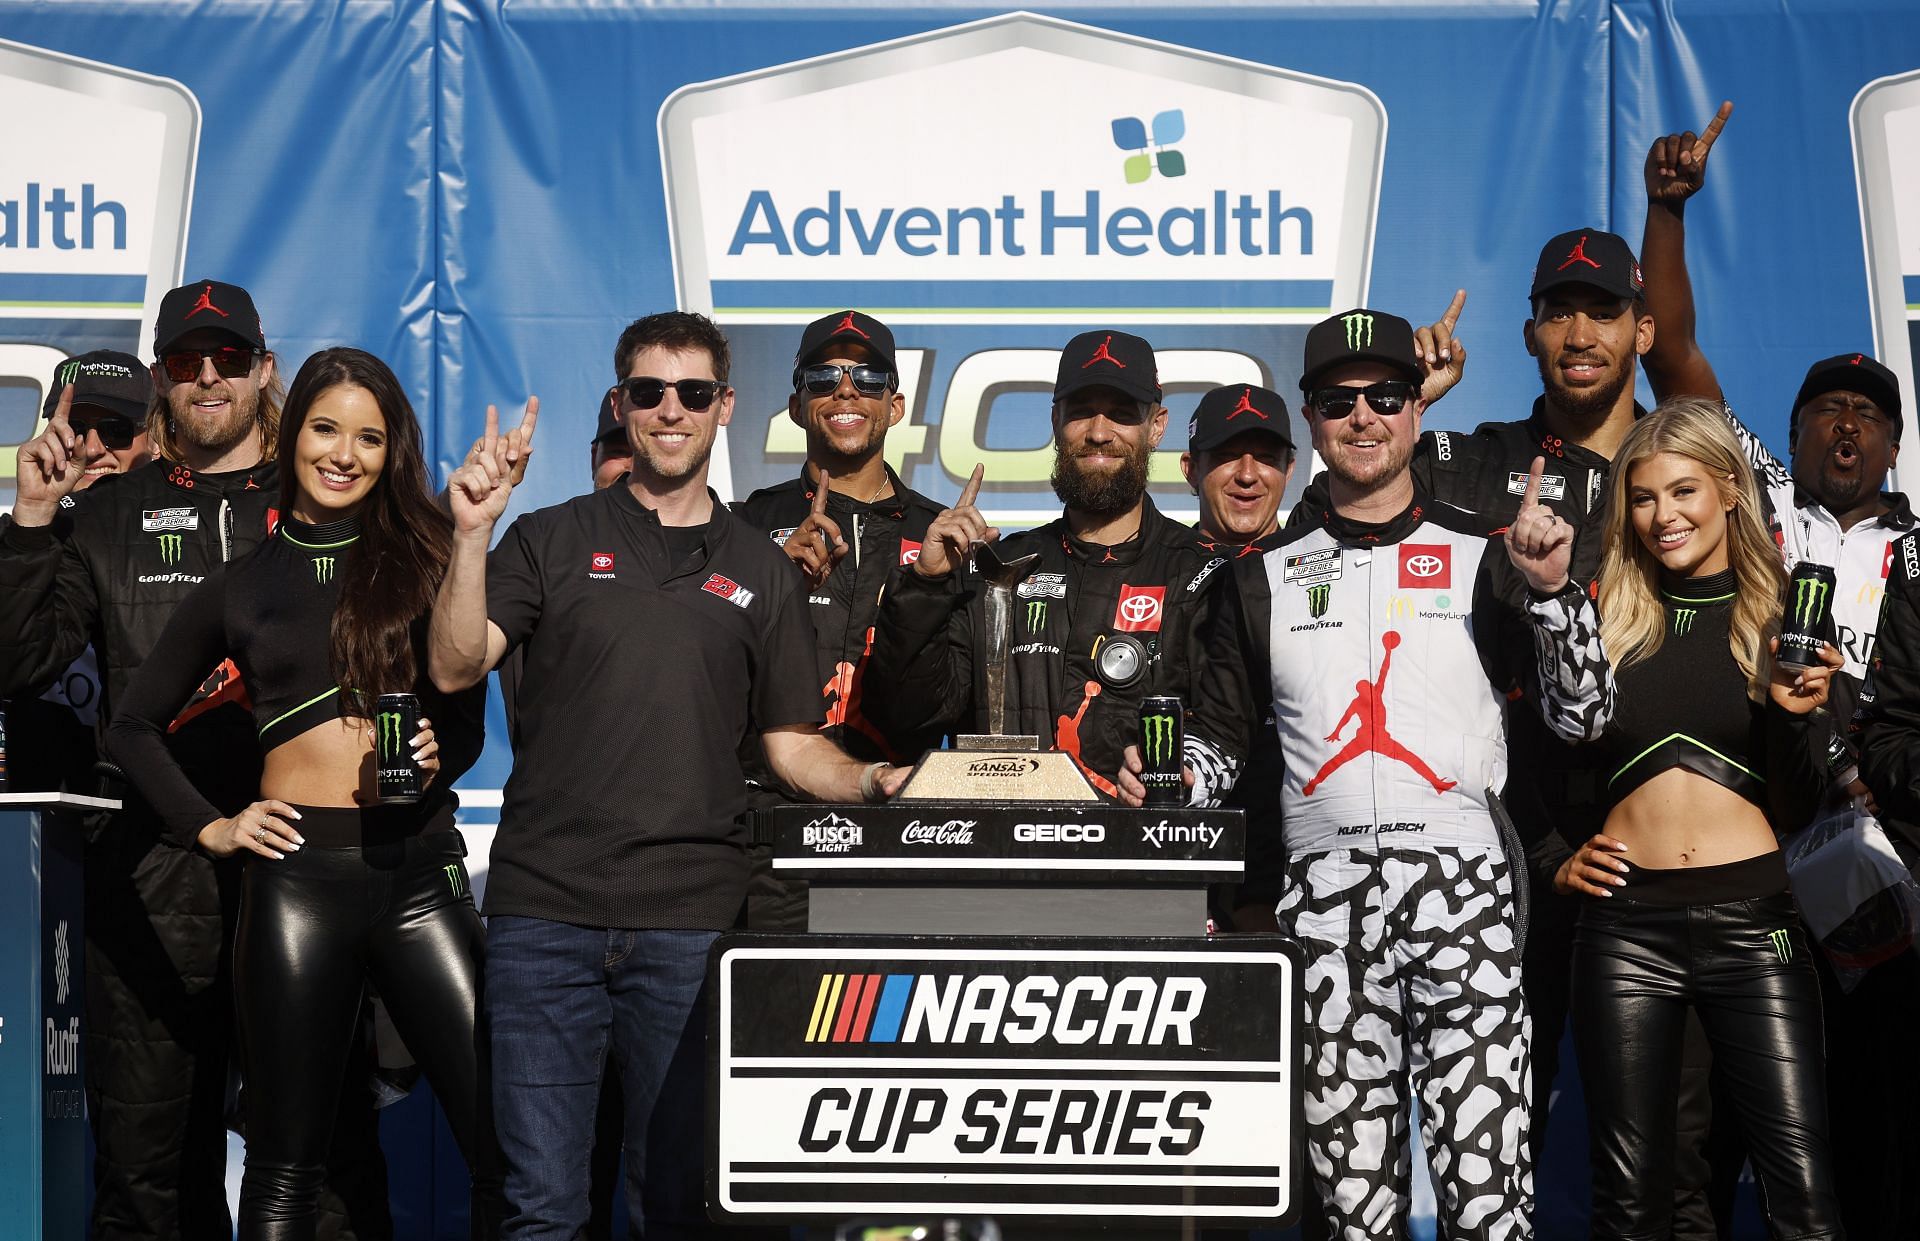 Denny Hamlin, Kurt Busch, and crew celebrate in victory lane after winning the 2022 NASCAR Cup Series AdventHealth 400 at Kansas Speedway (Photo by Chris Graythen/Getty Images)